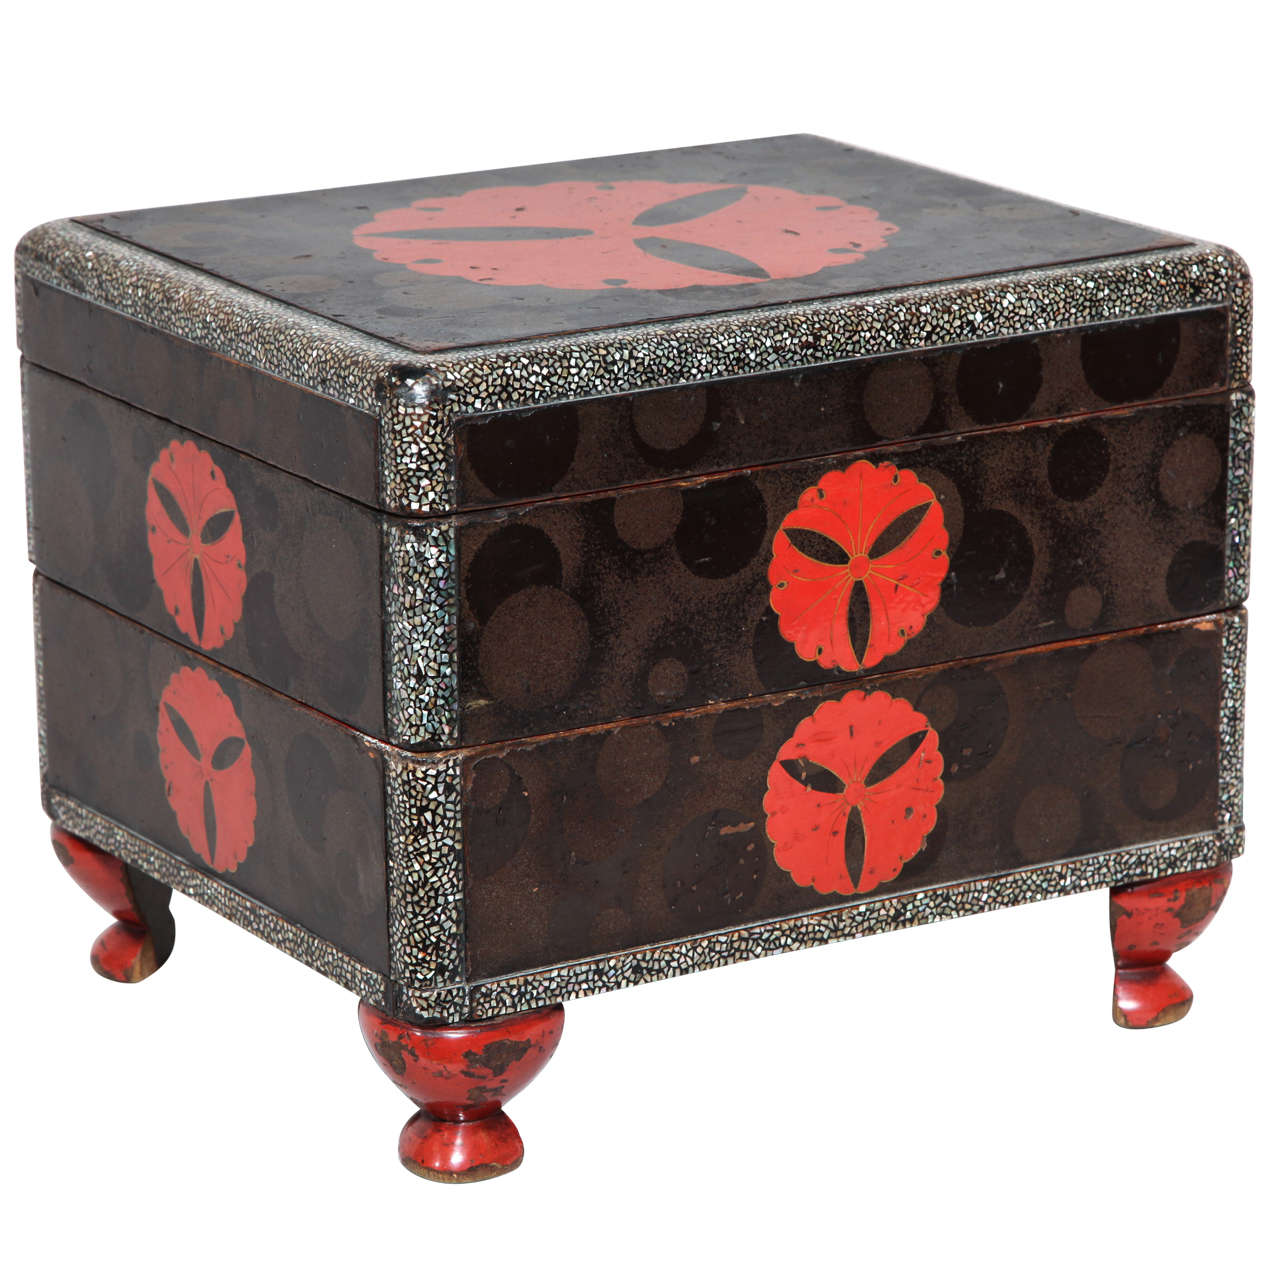 Antique Japanese Lacquer Tiered Document Box